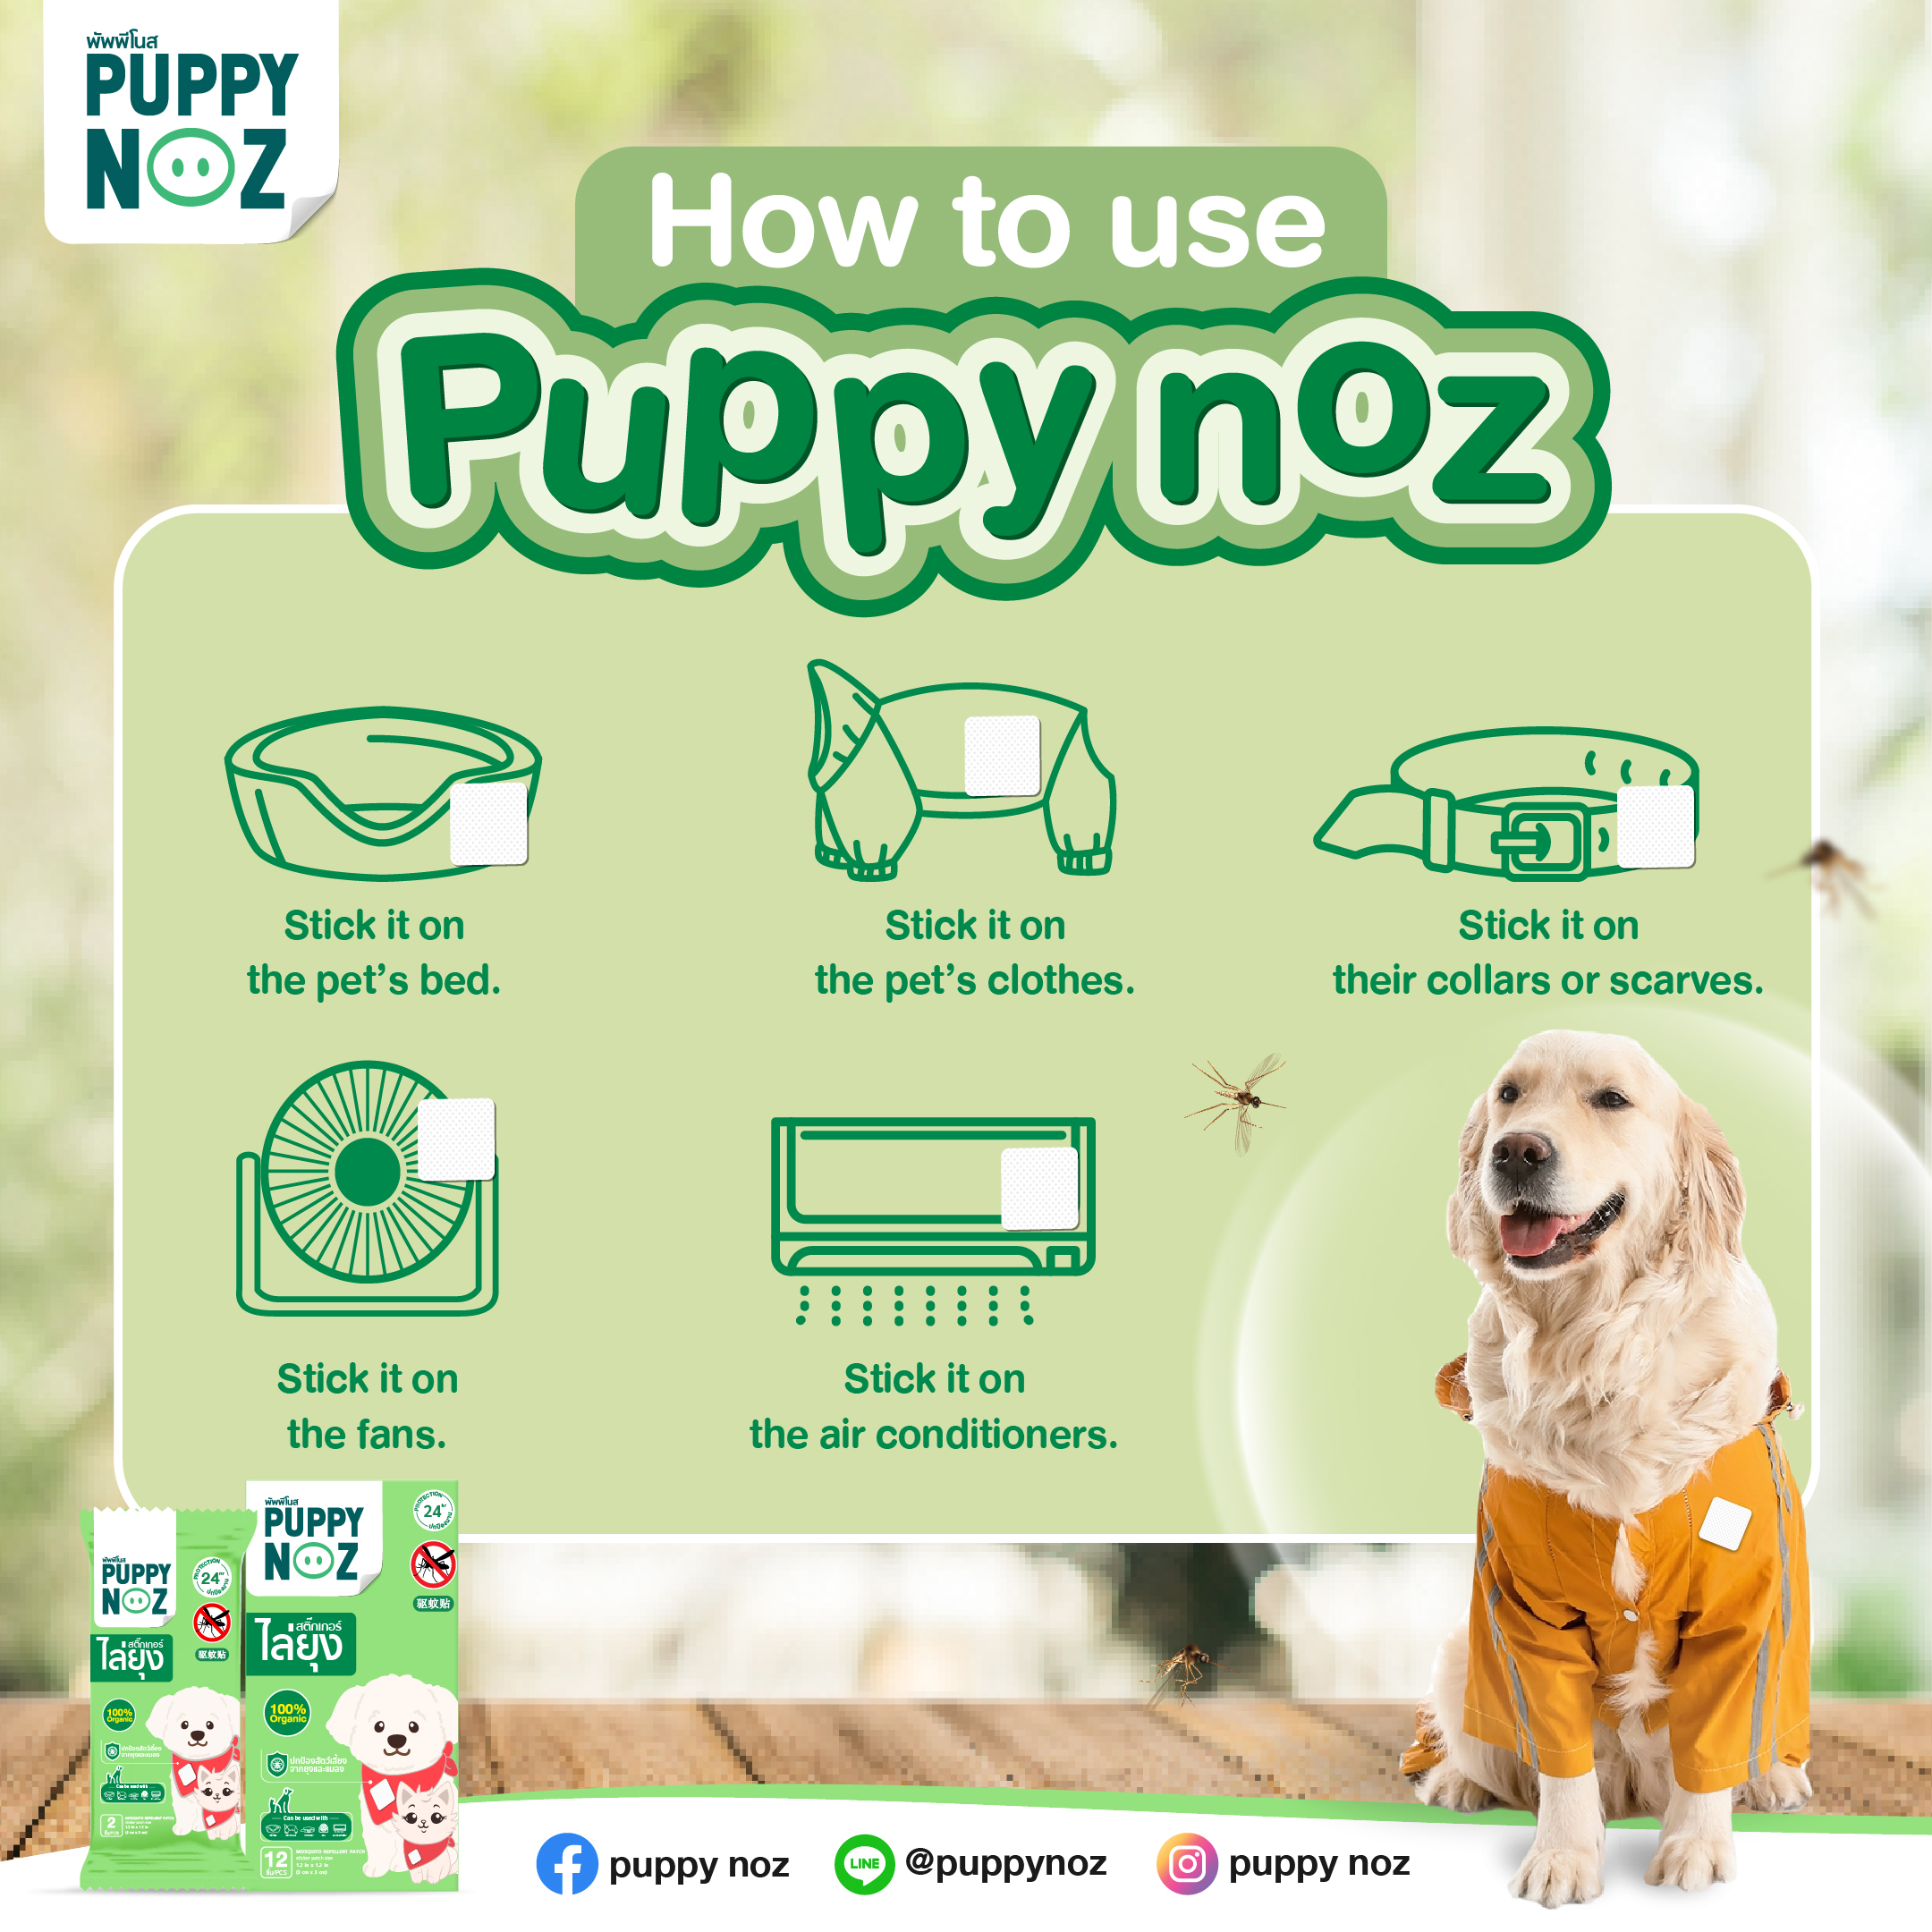 How to Use Puppy noz_ENG